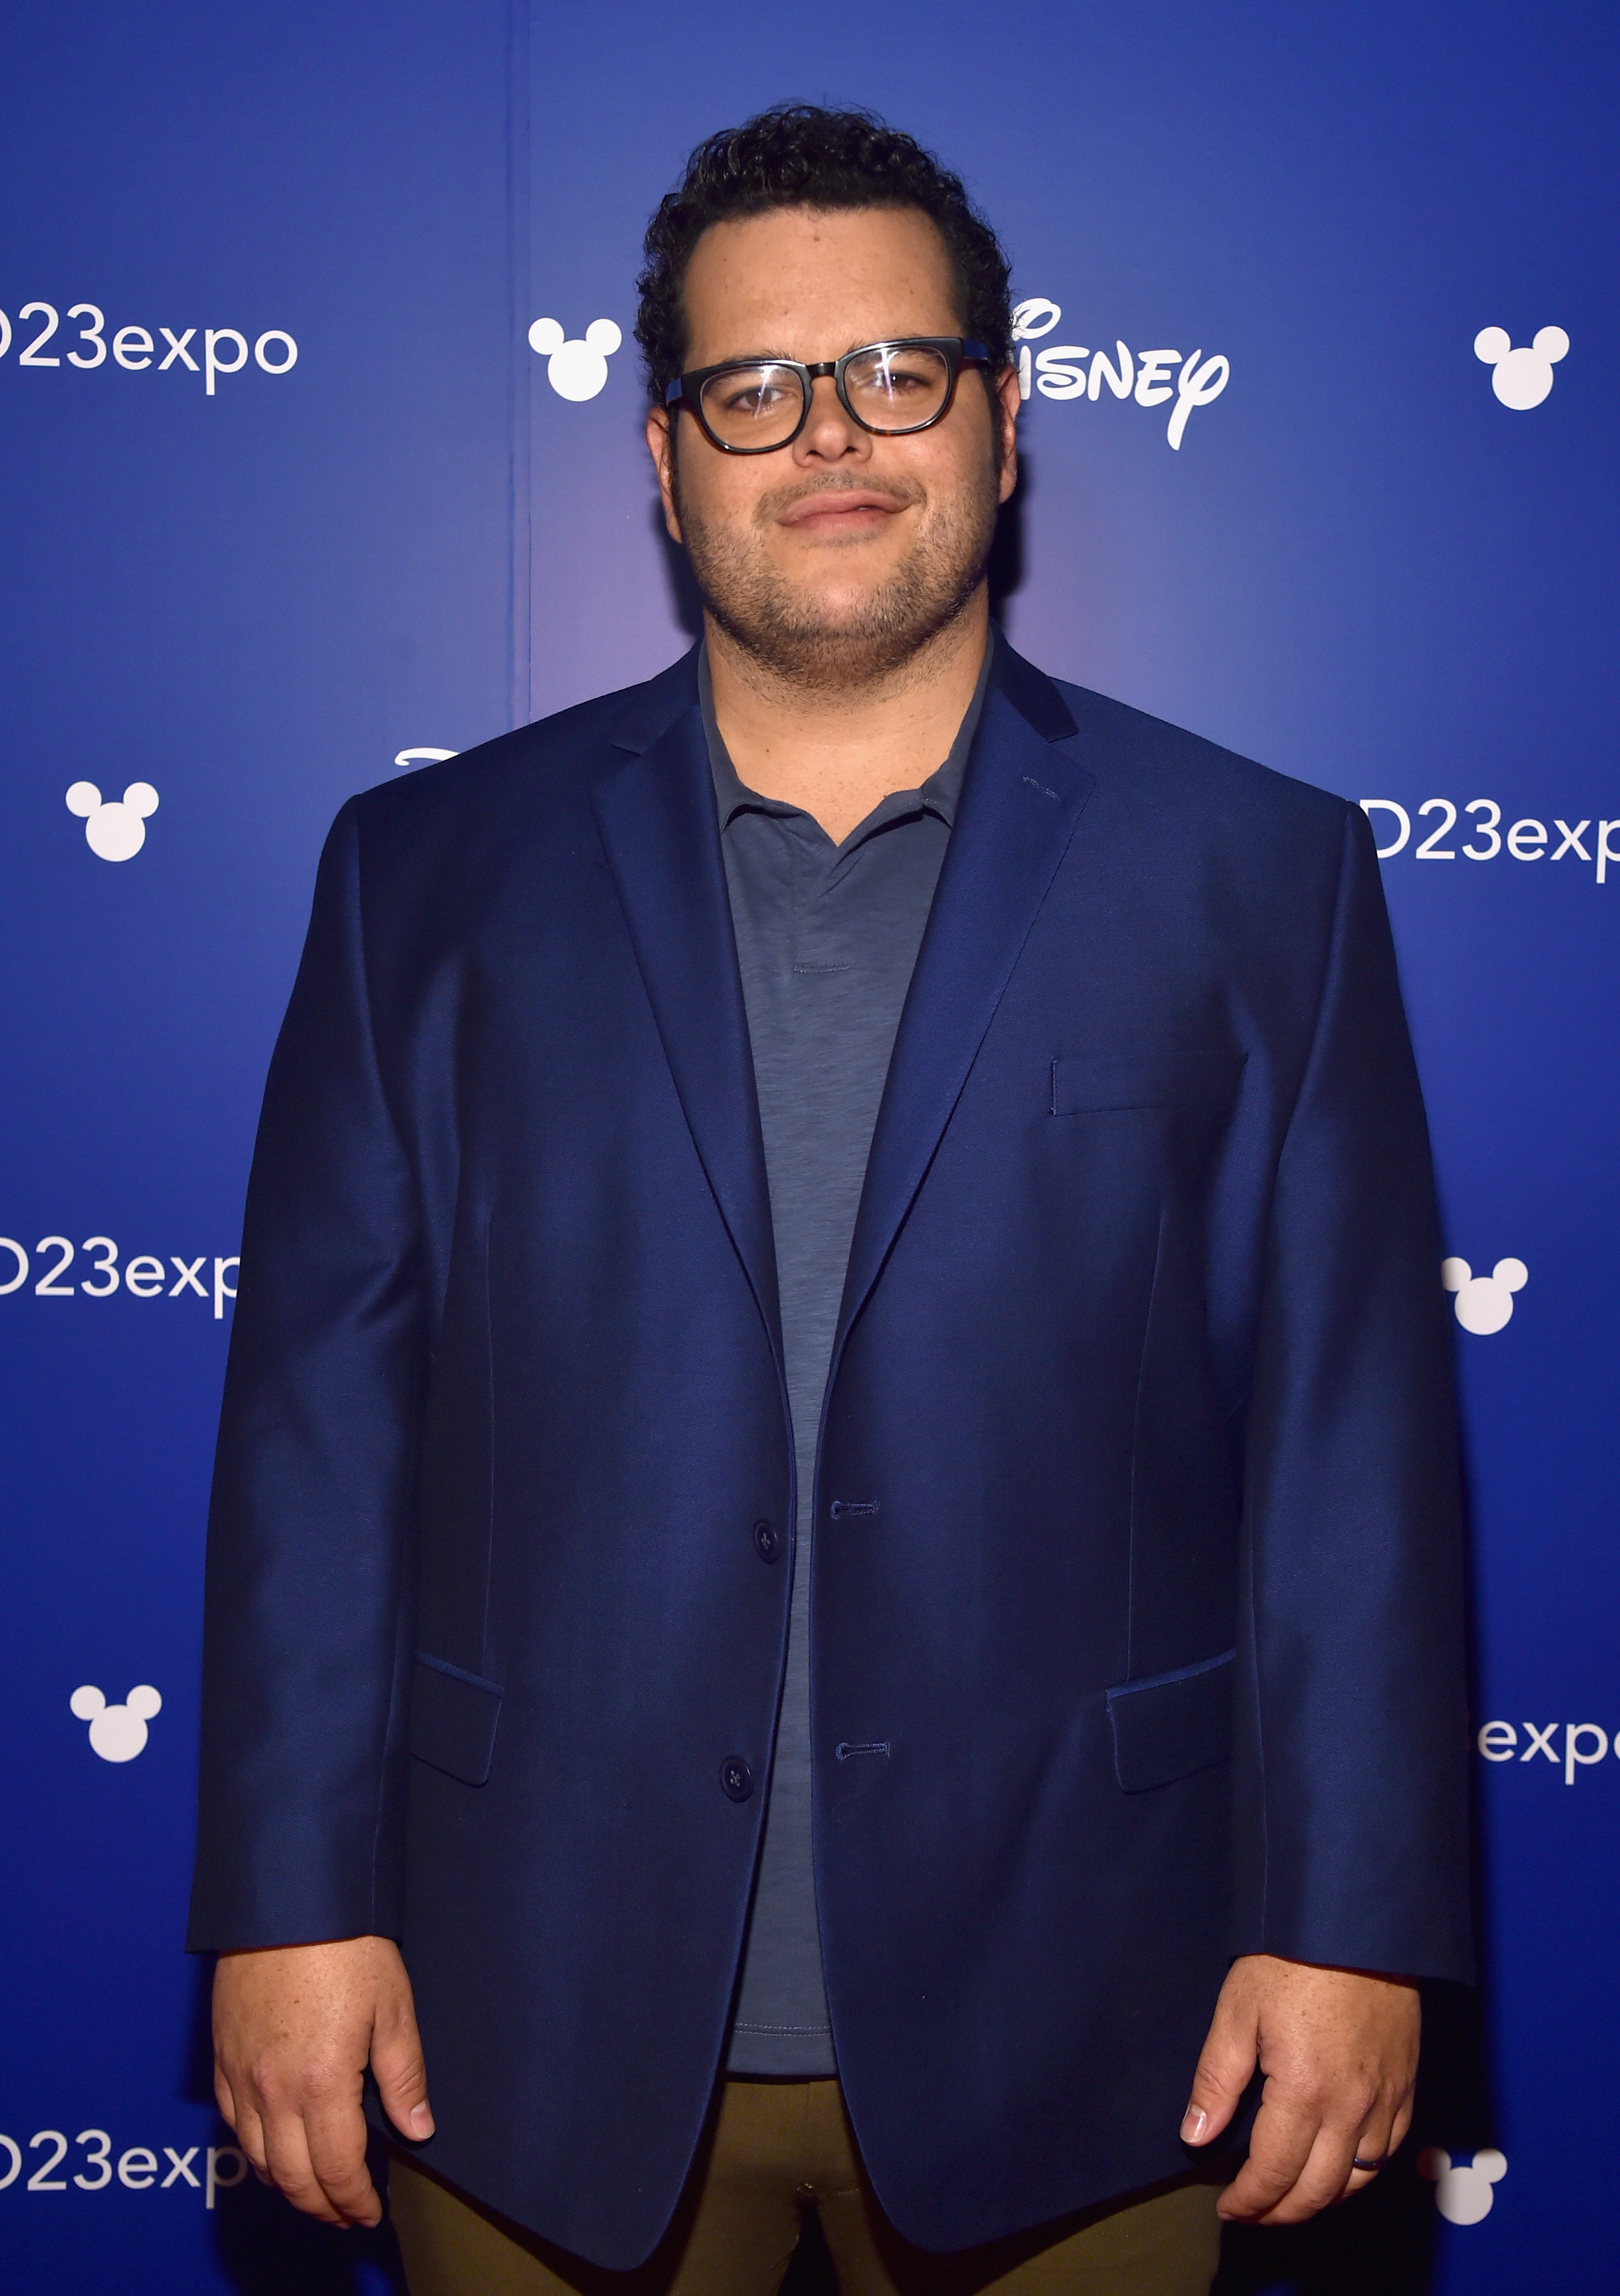 Actor Josh Gad will make his directorial debut with the biopic